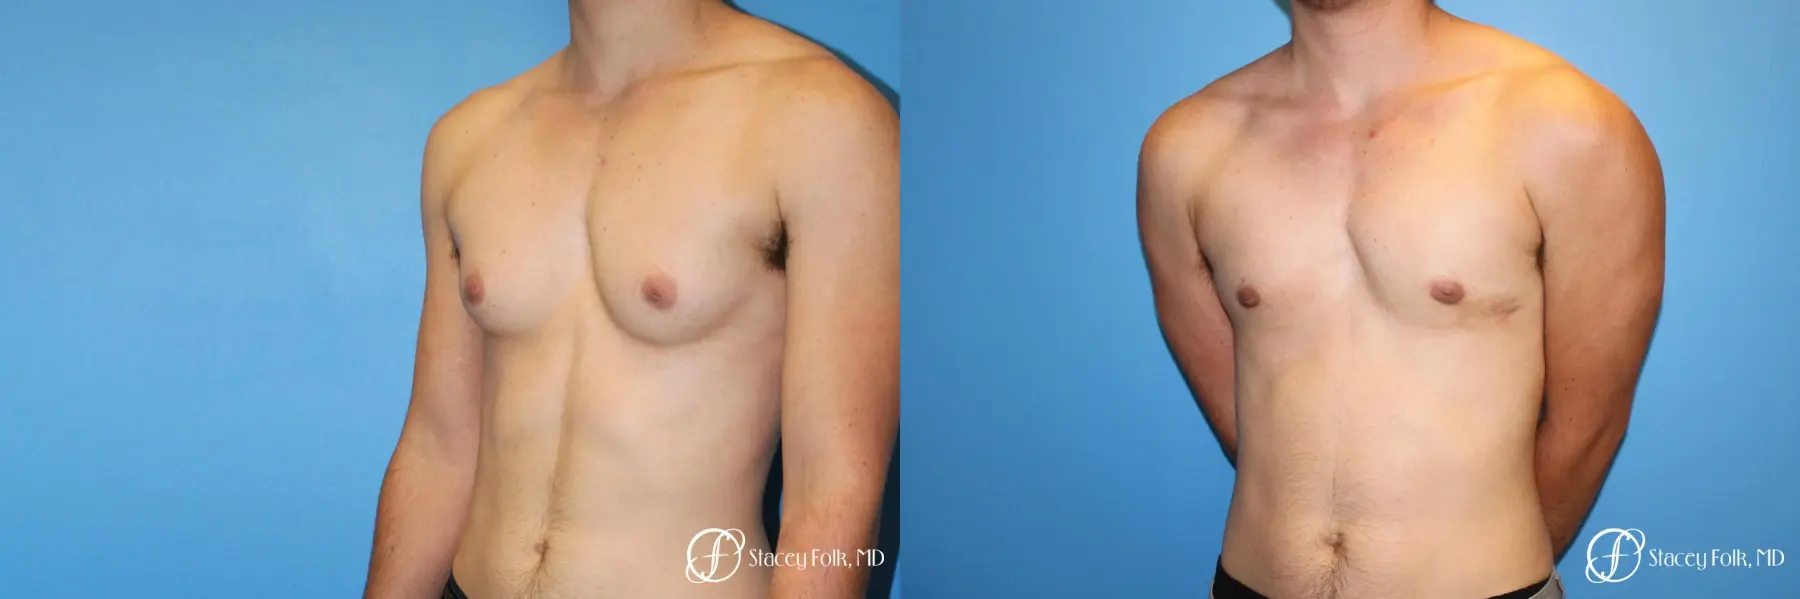 Denver FTM female to male top surgery using gynecomastia technique 5128 - Before and After 3